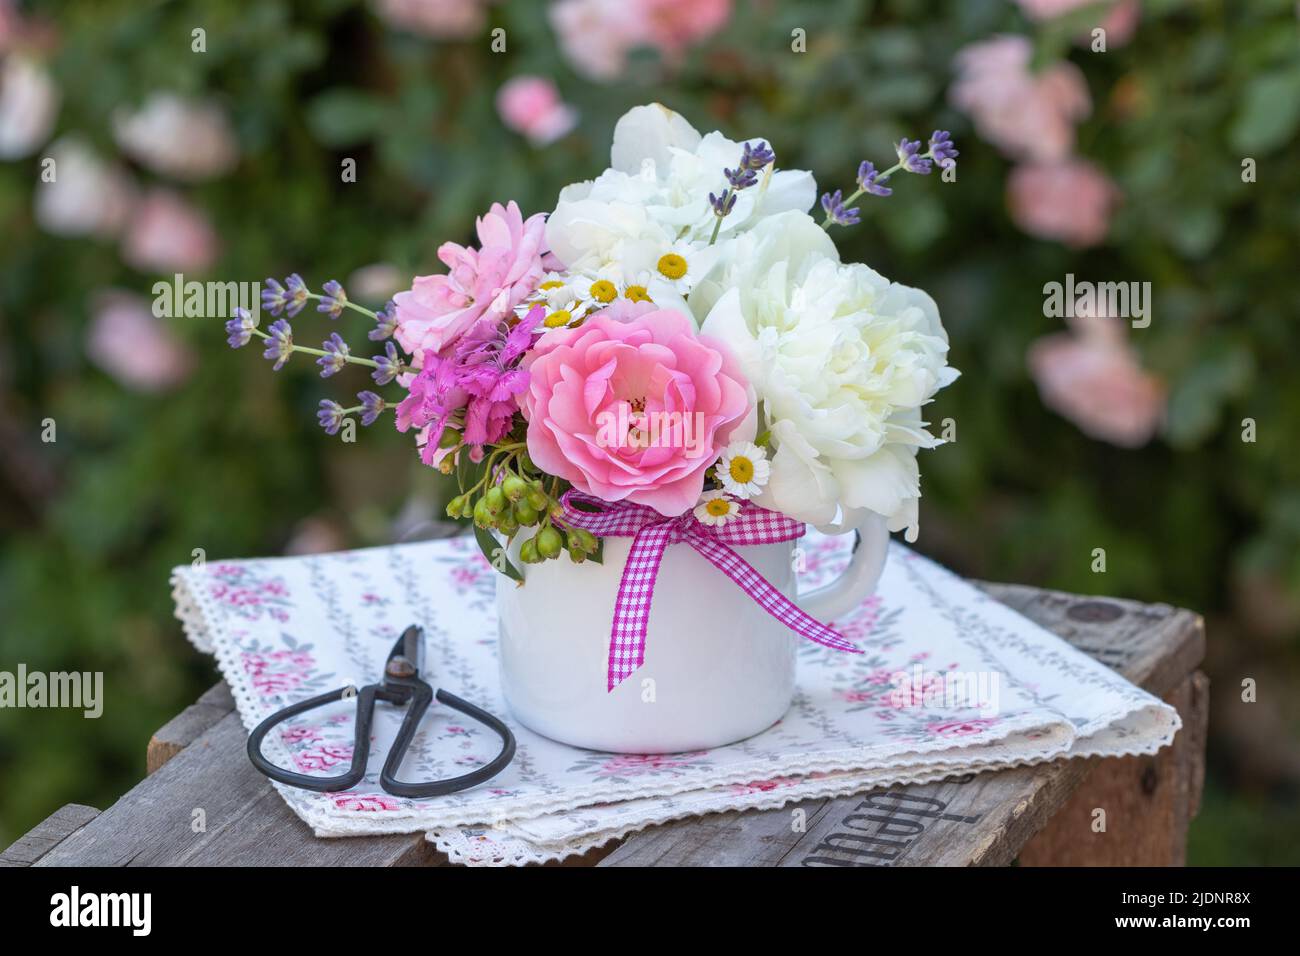 bouquet of pink roses and white peony flowers in vintage enamel cup Stock Photo